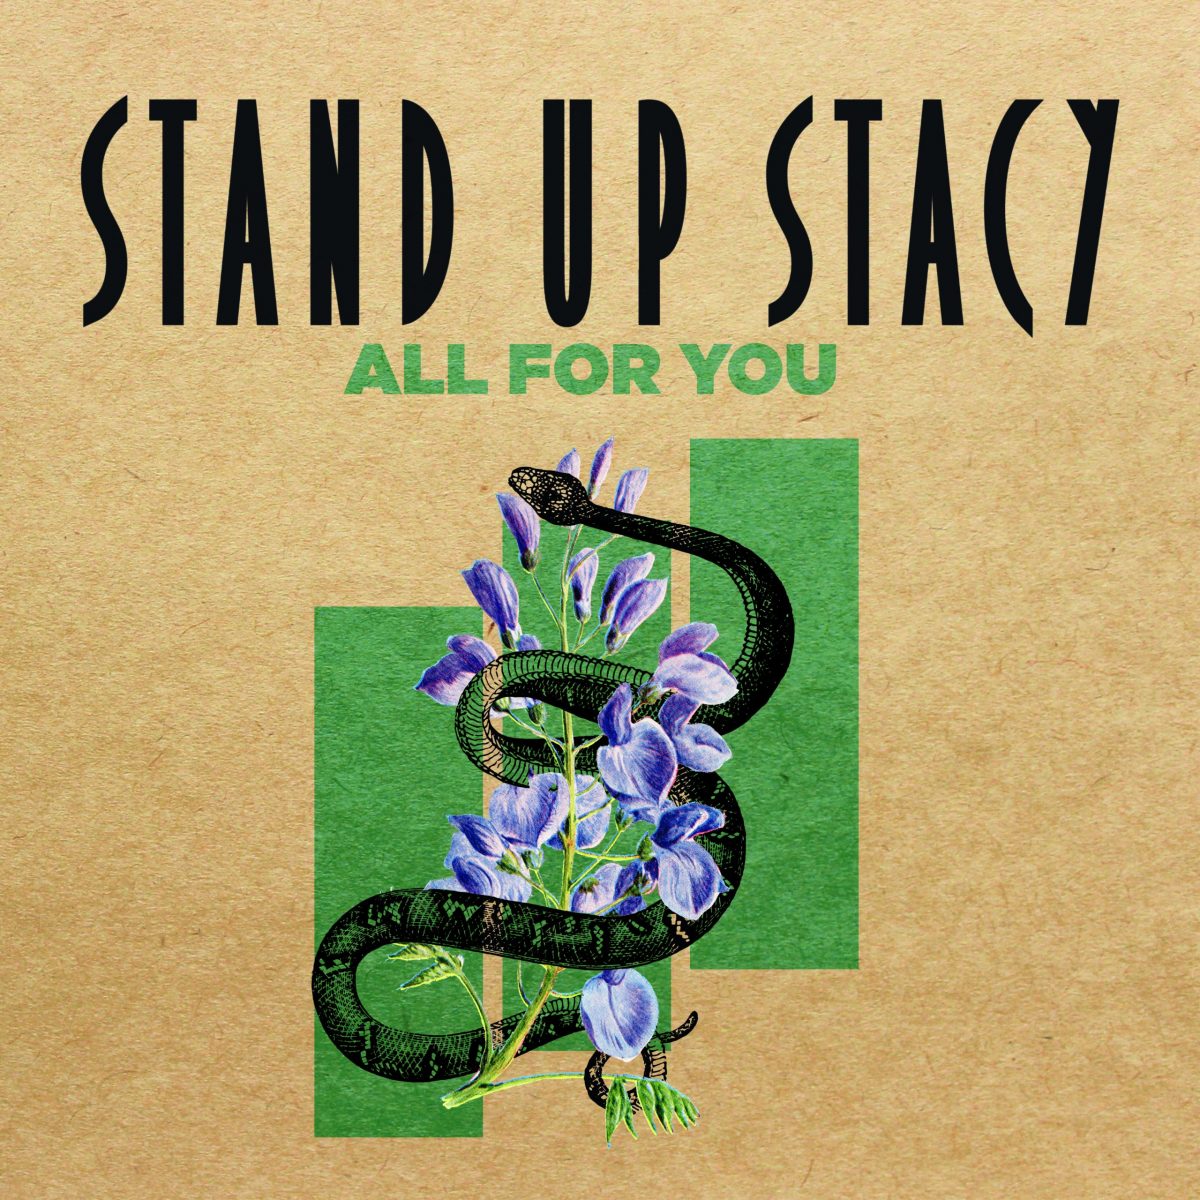 stand-up-stacy-veroeffentlichen-all-for-you-news